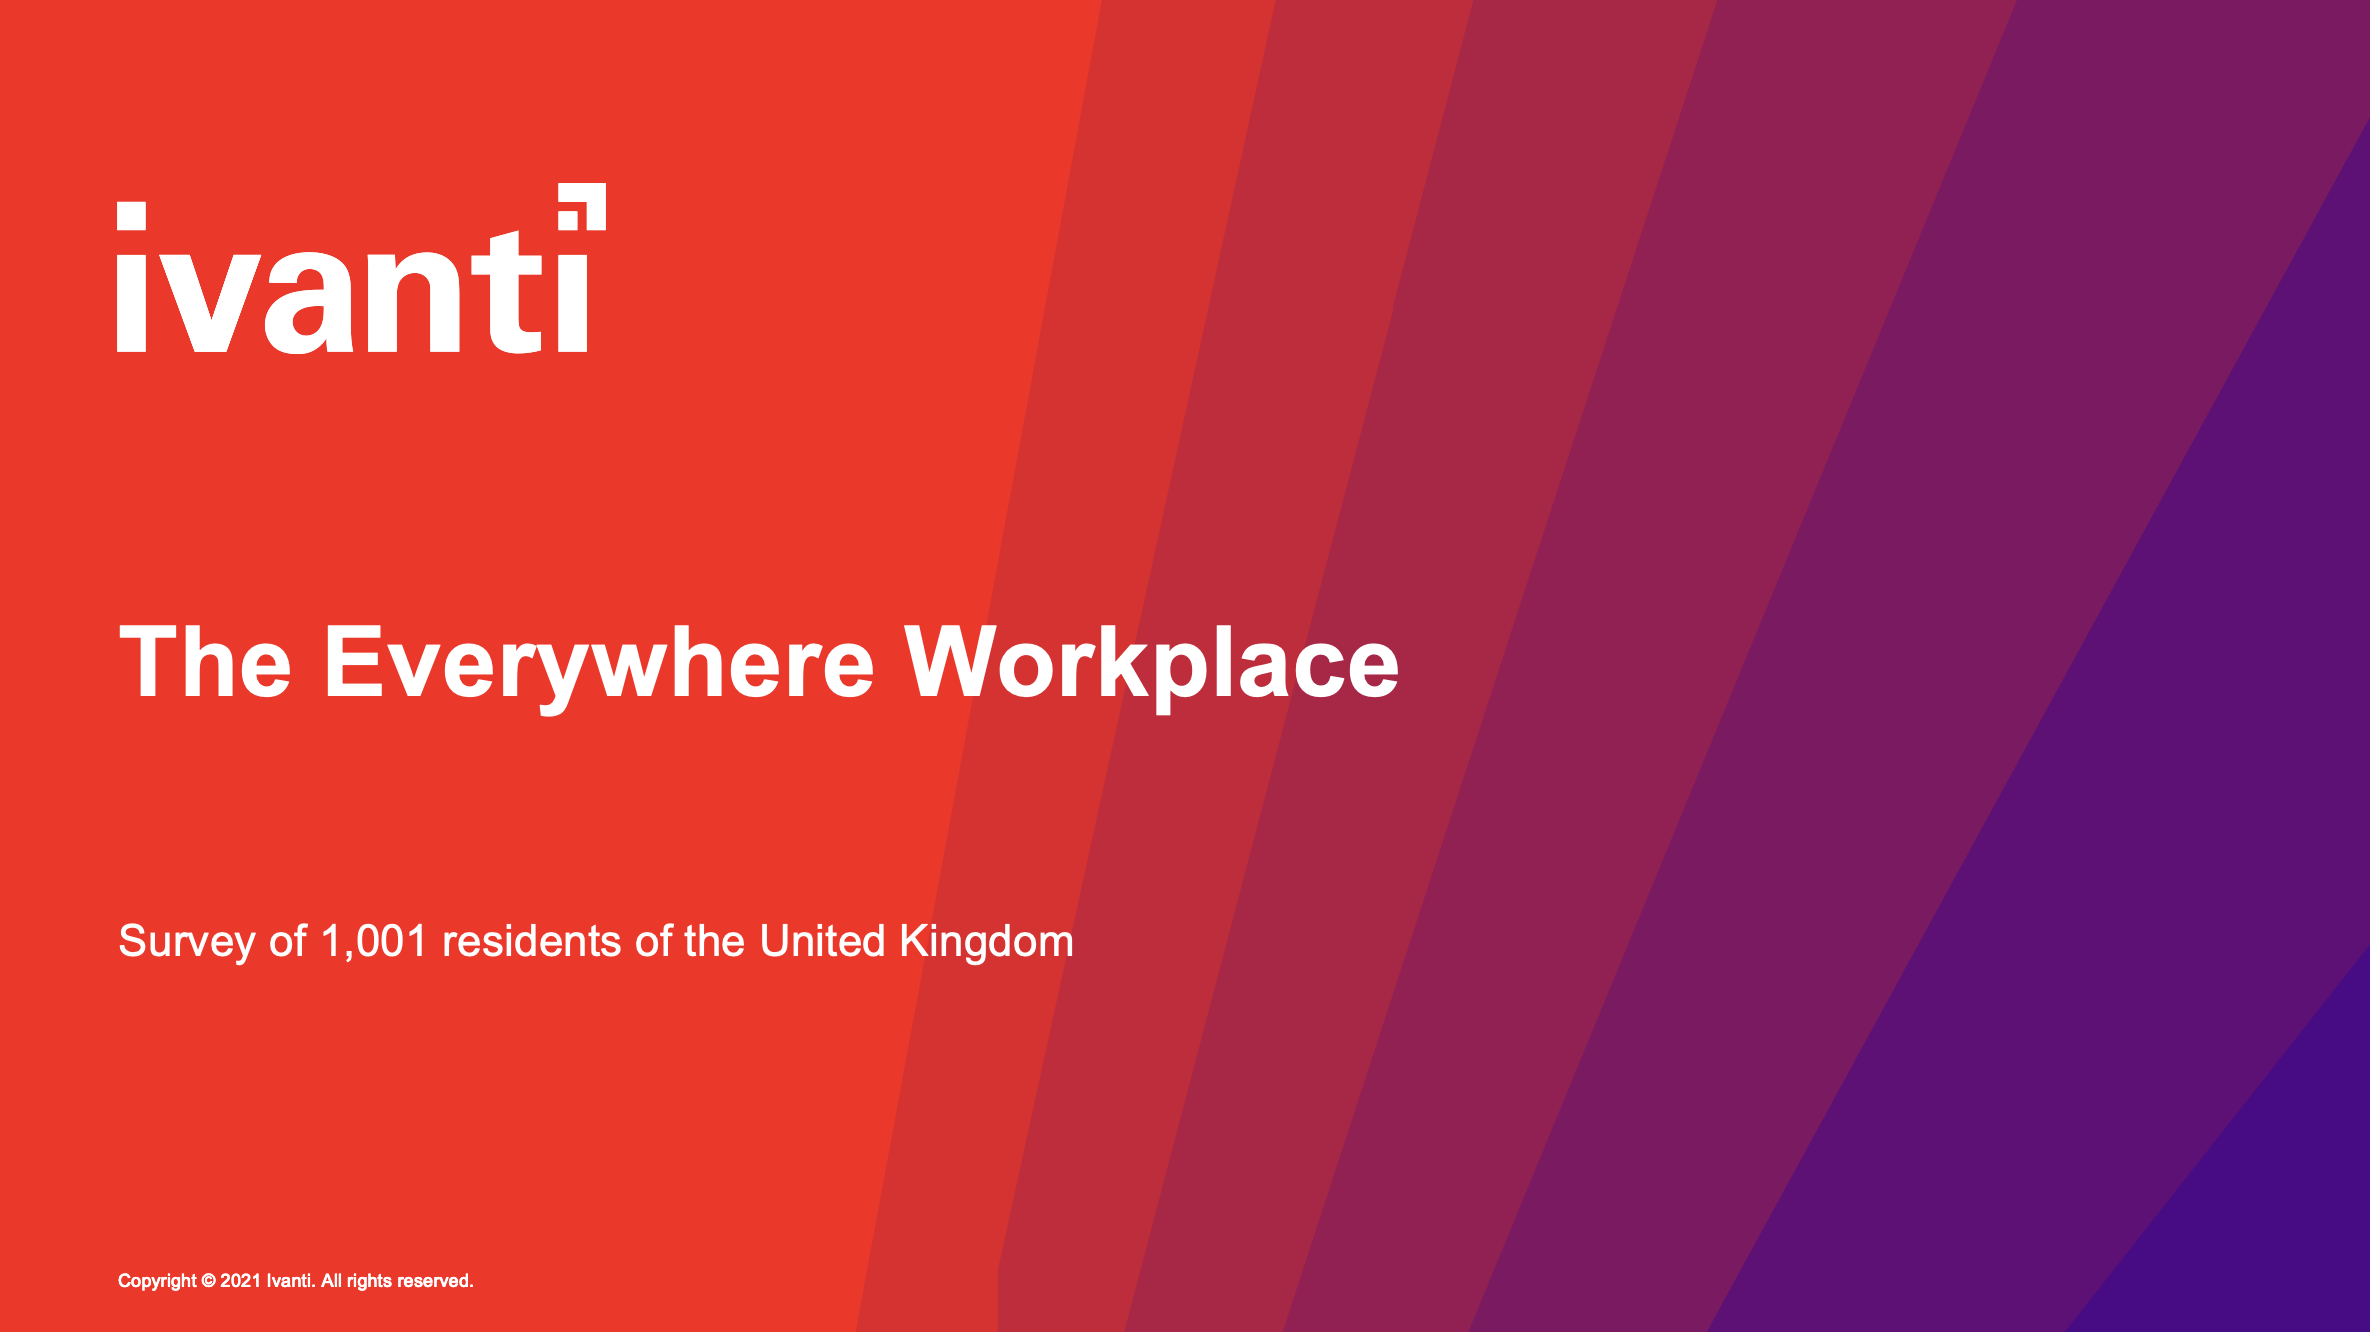 Everywhere Workplace Survey Results for UK PowerPoint Screenshot